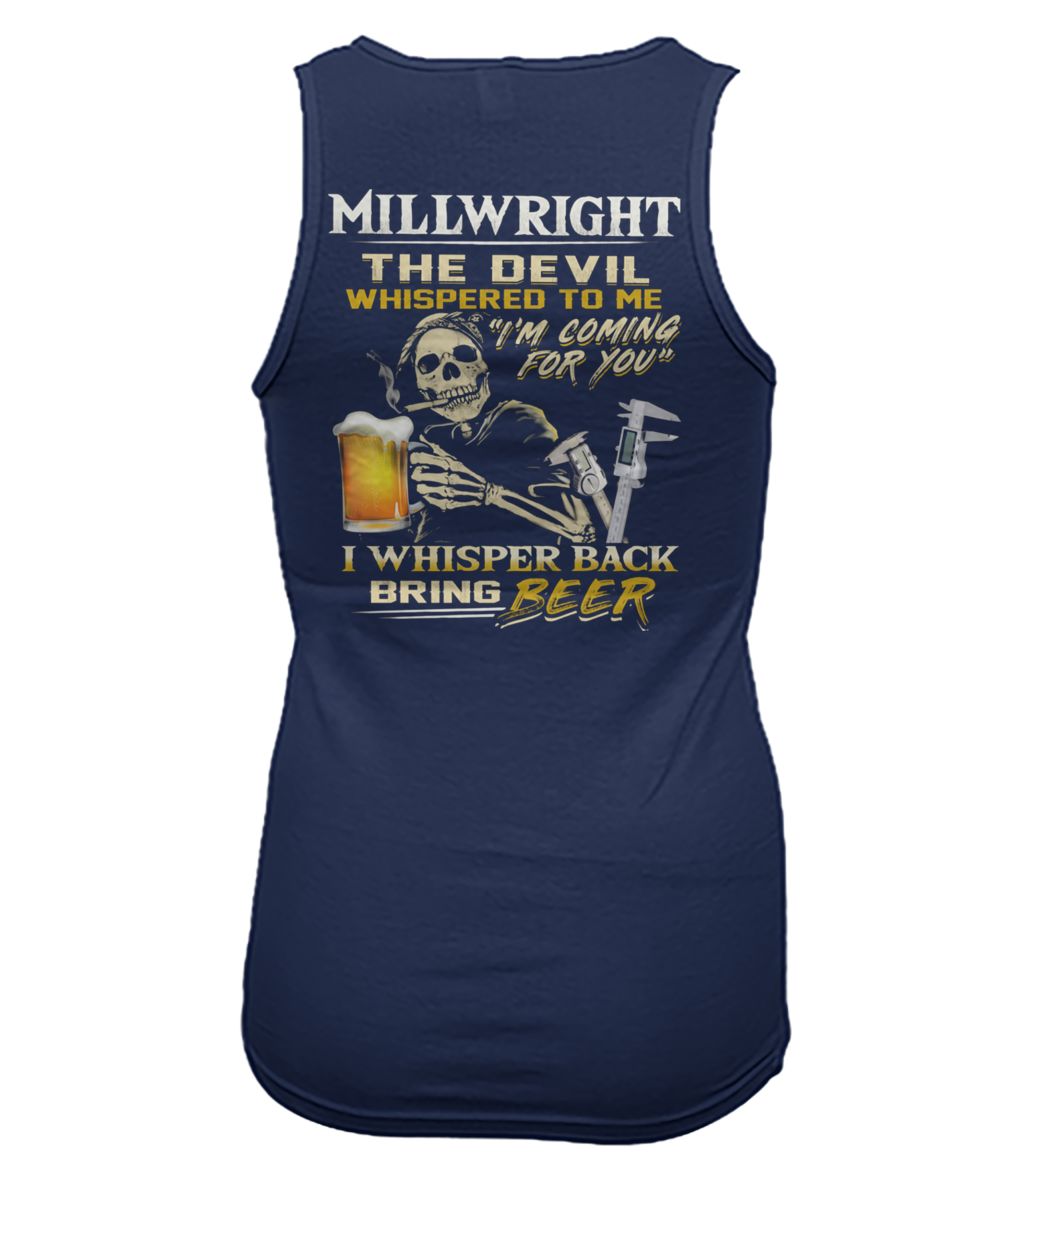 Millwright the devil whispered to me I'm coming for you women's tank top